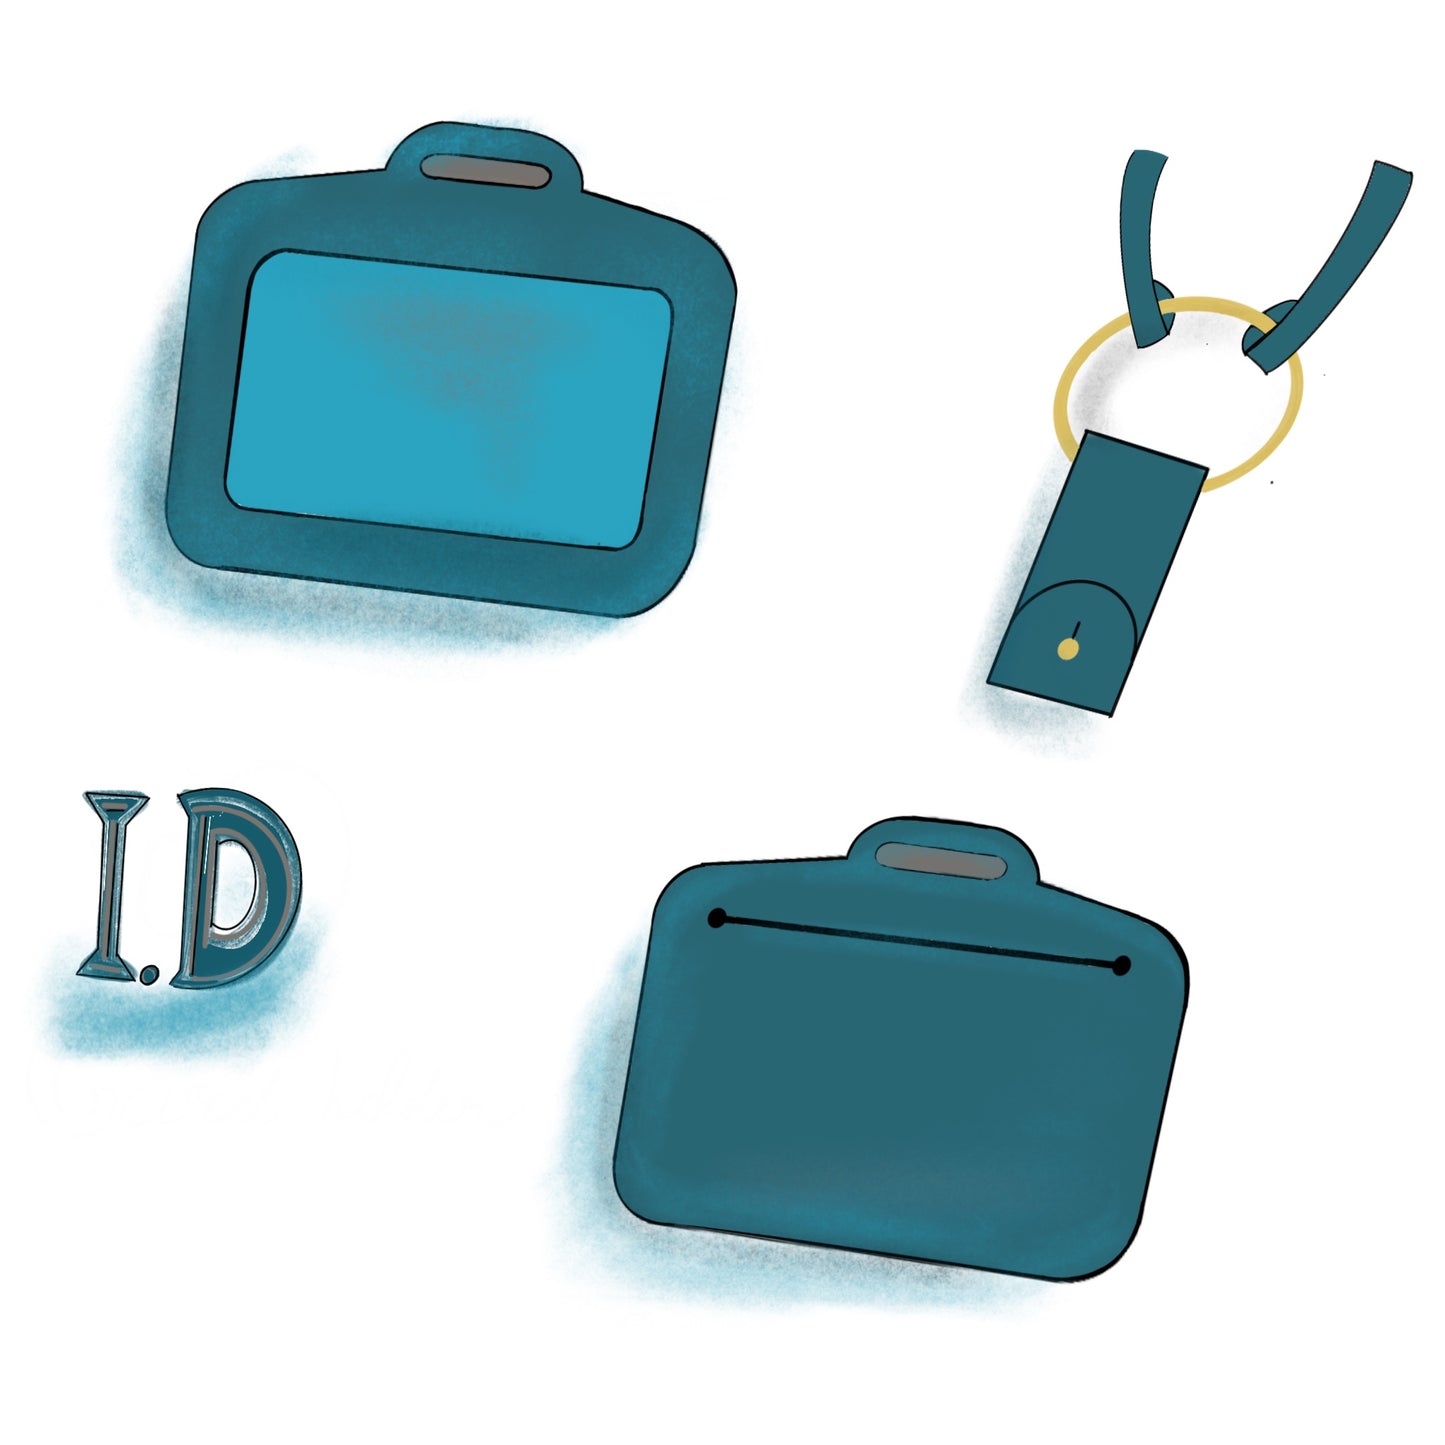 I.D Tag | Leather craft Template - DIY - PDF pattern